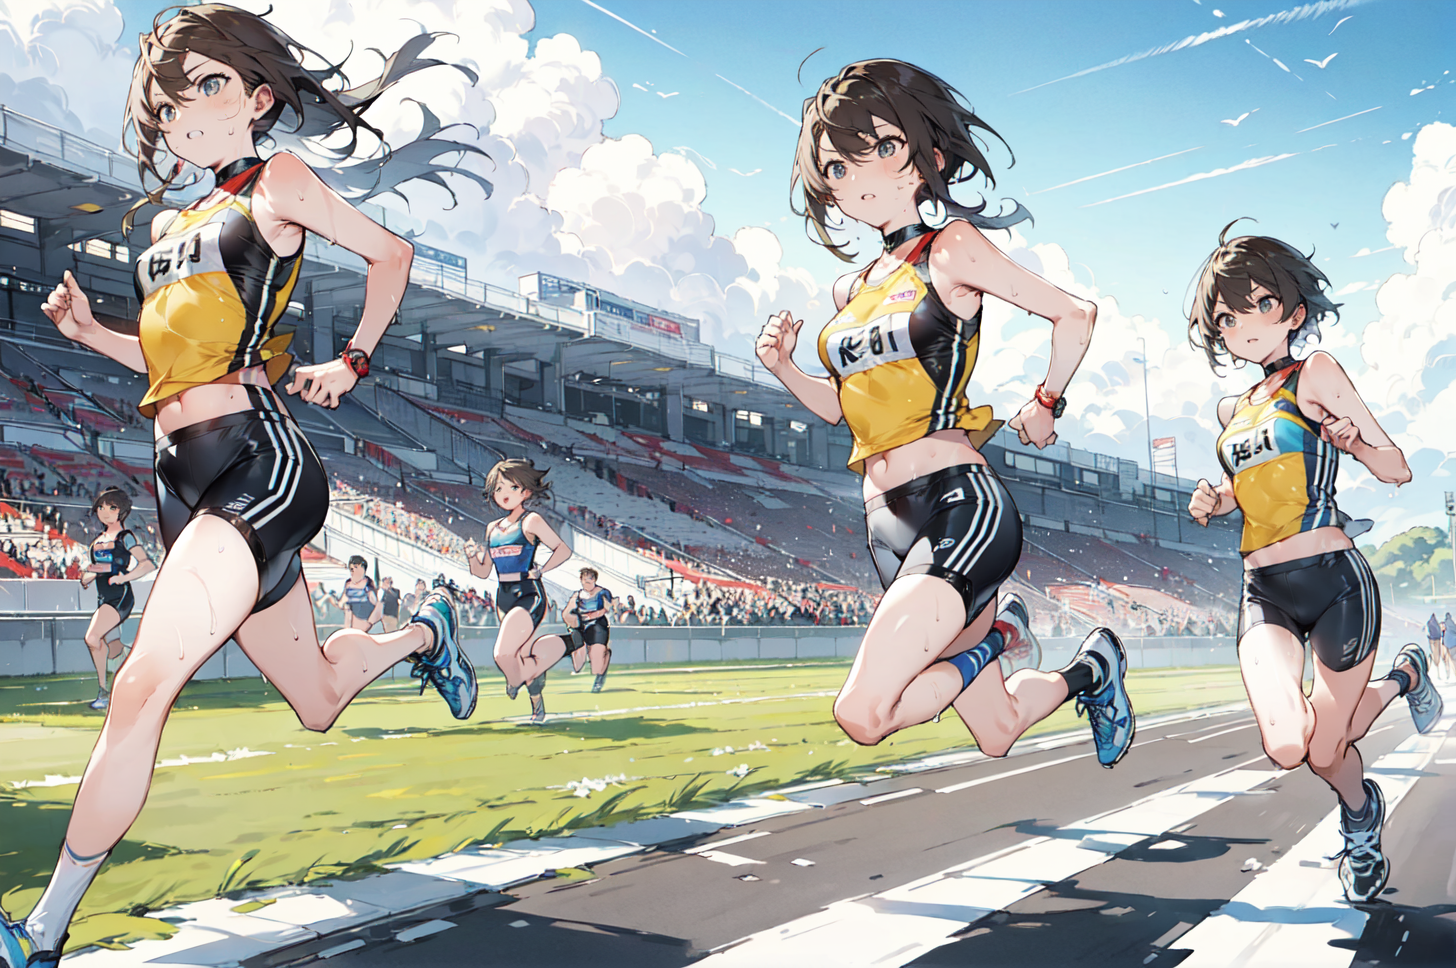 AI Art: Changed into better clothes for running by @ArmosAI